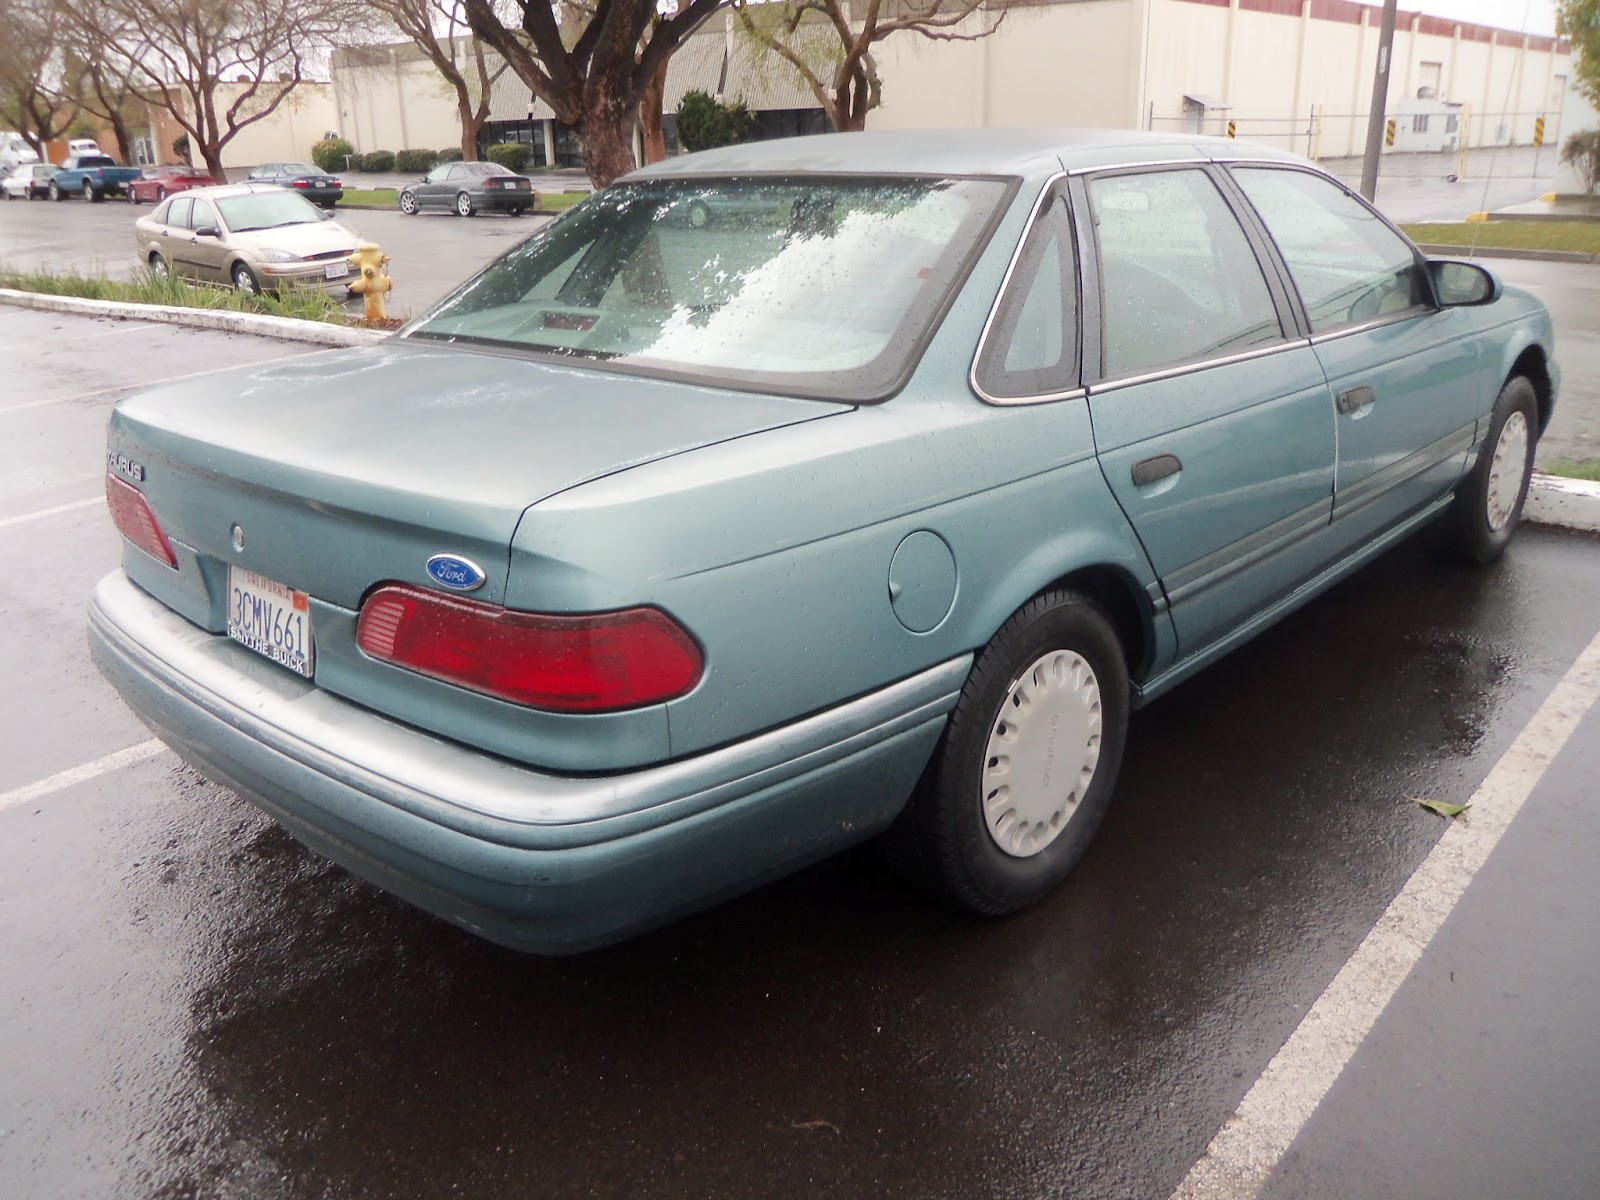 1993 Ford taurus paint colors #7